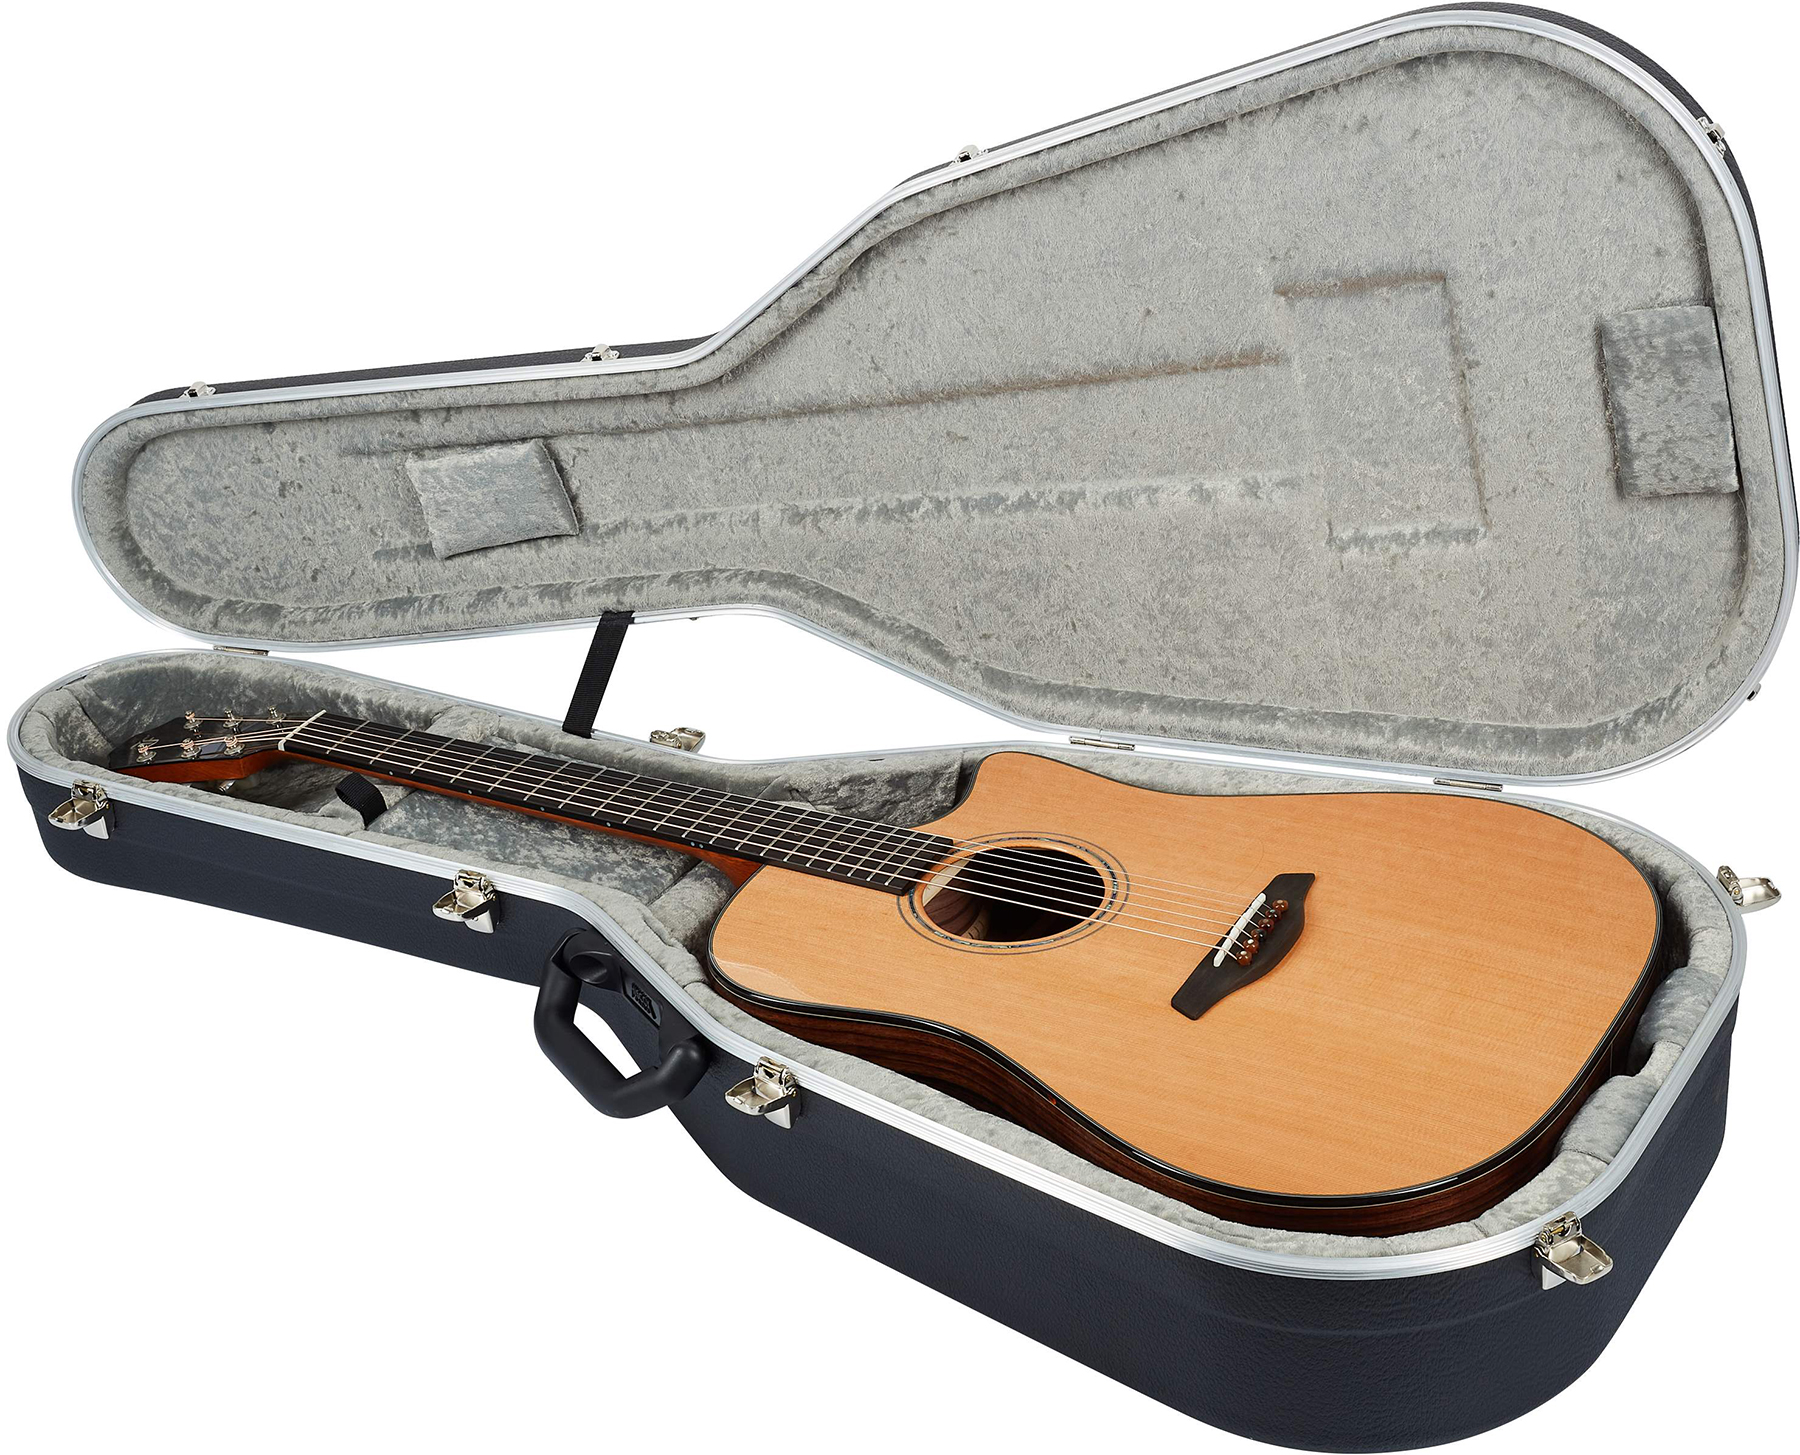 Furch Dc-cr Lrb1 Yellow Dreadnought Cw Cedre Palissandre Eb - Natural Full-pore - Electro acoustic guitar - Variation 6